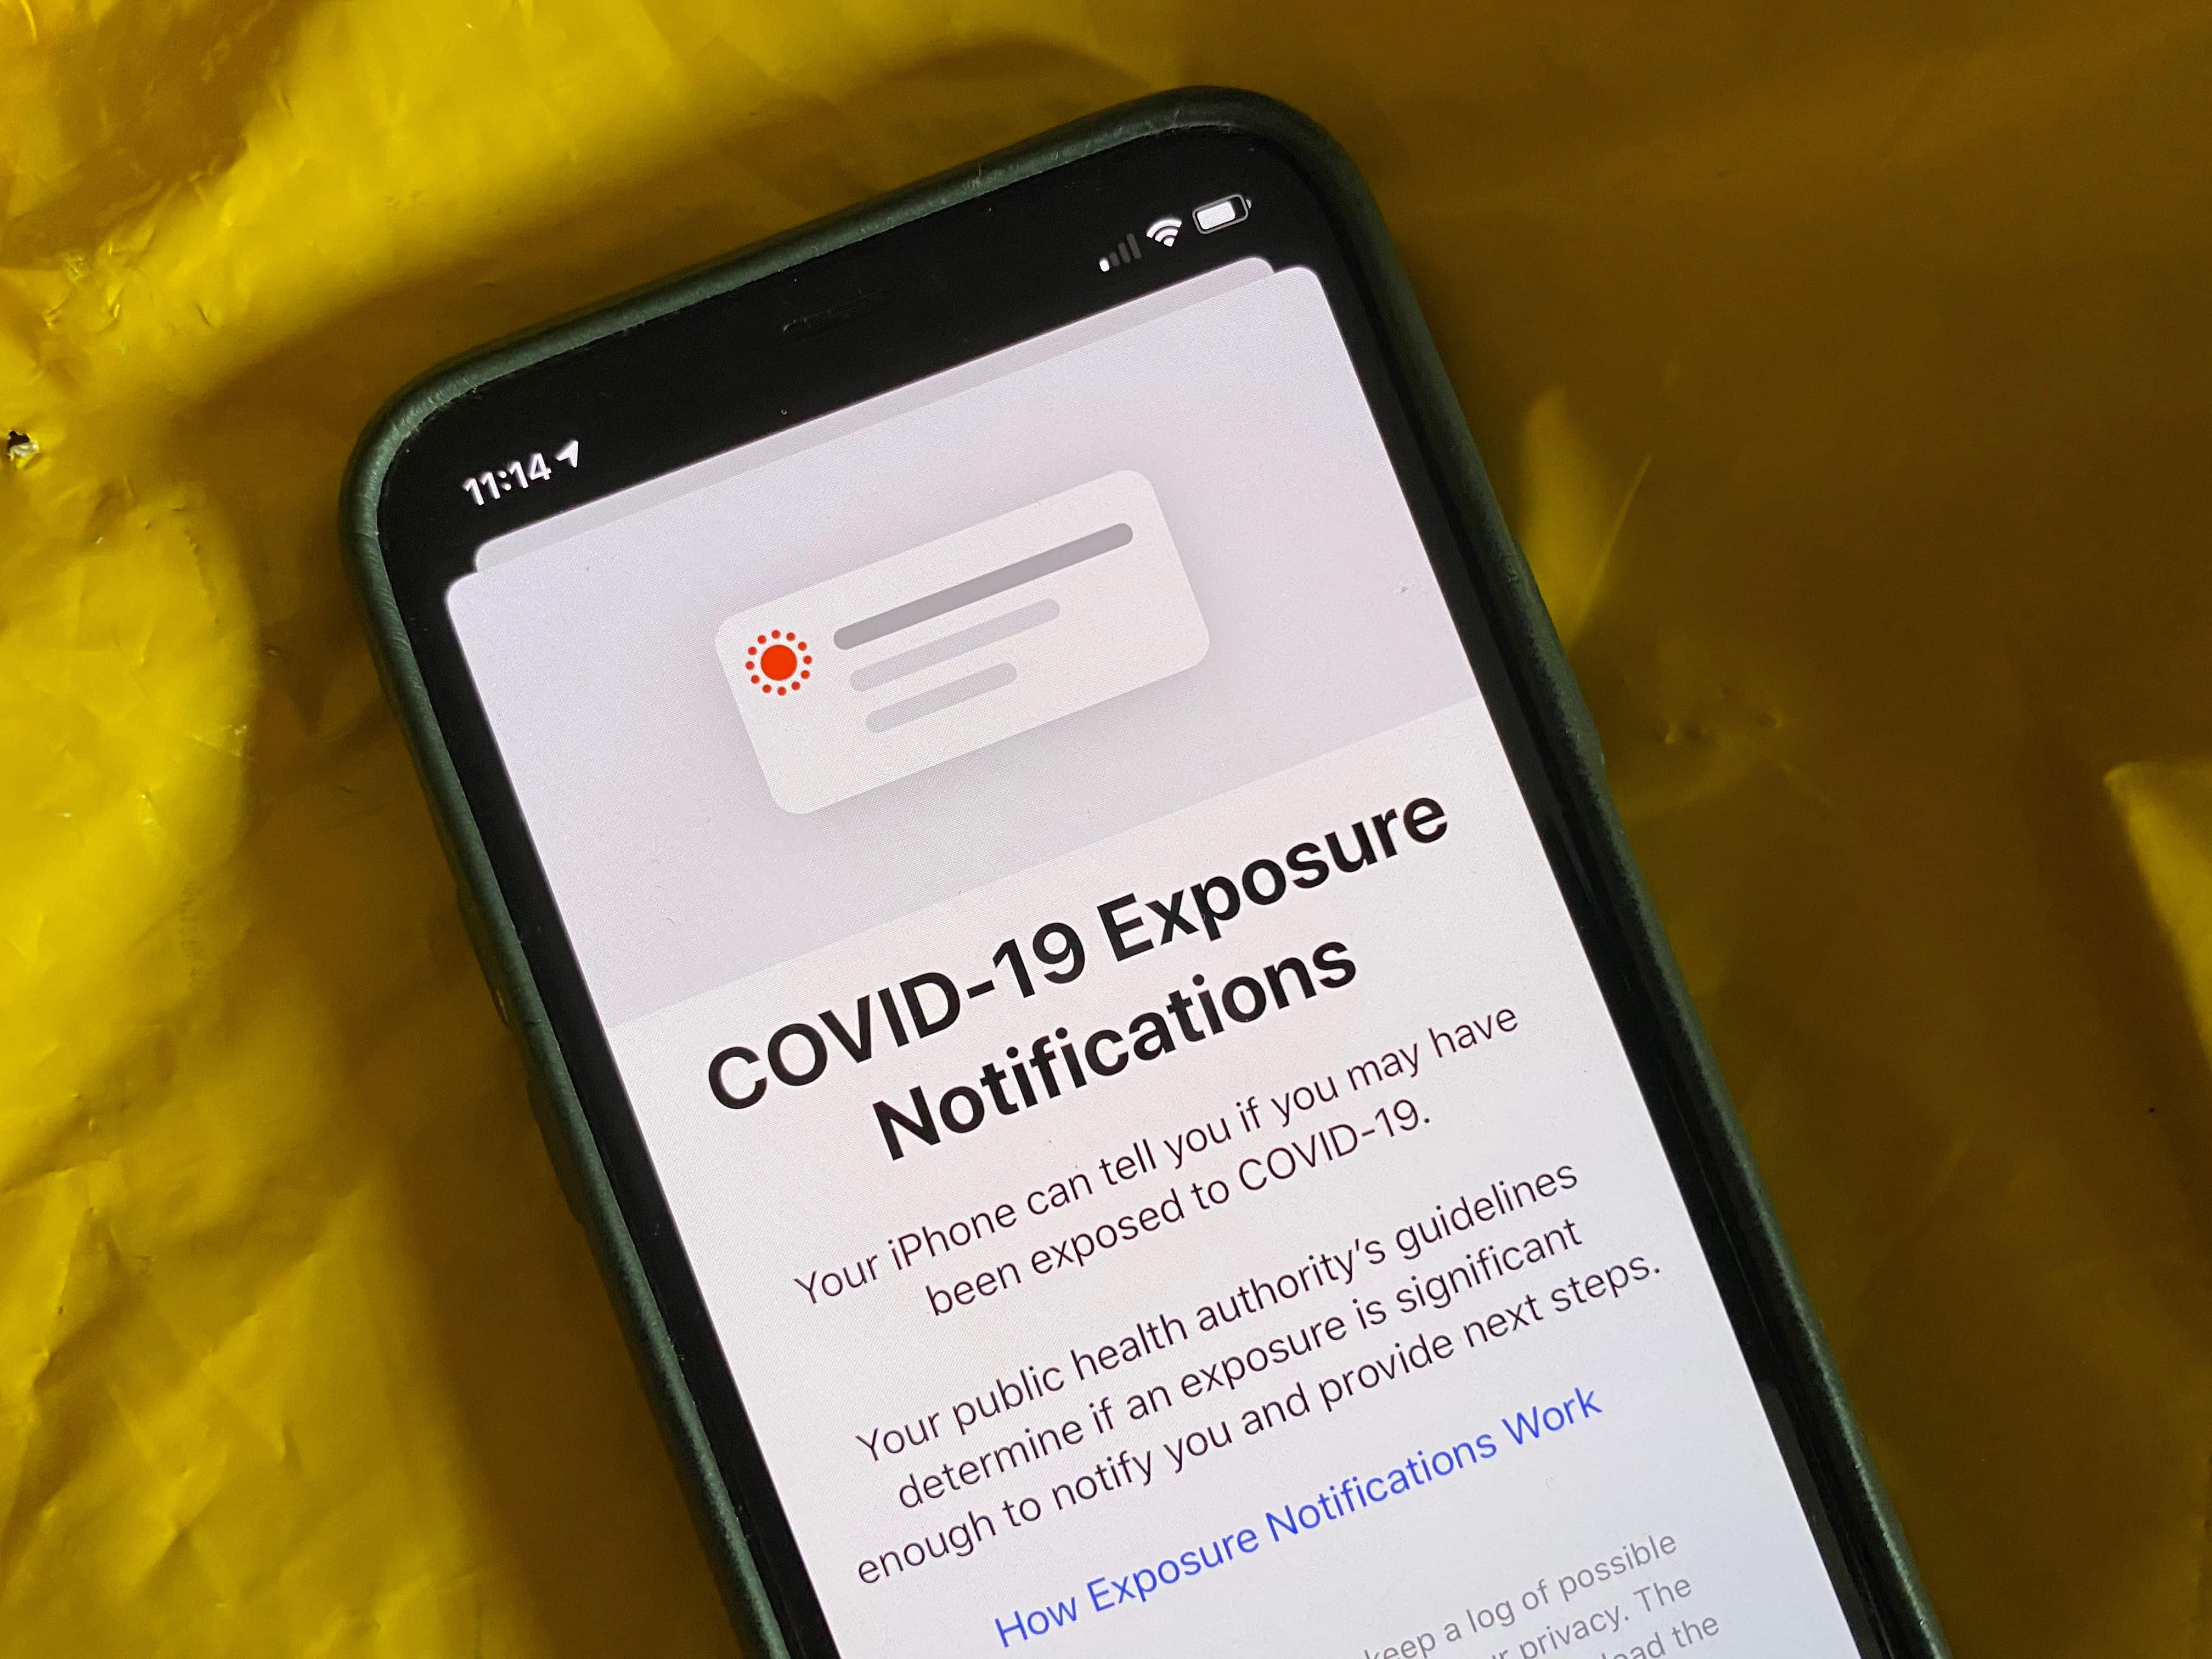 iPhone owners refuse iOS 13.7 for fear of COVID-19 contact-tracing